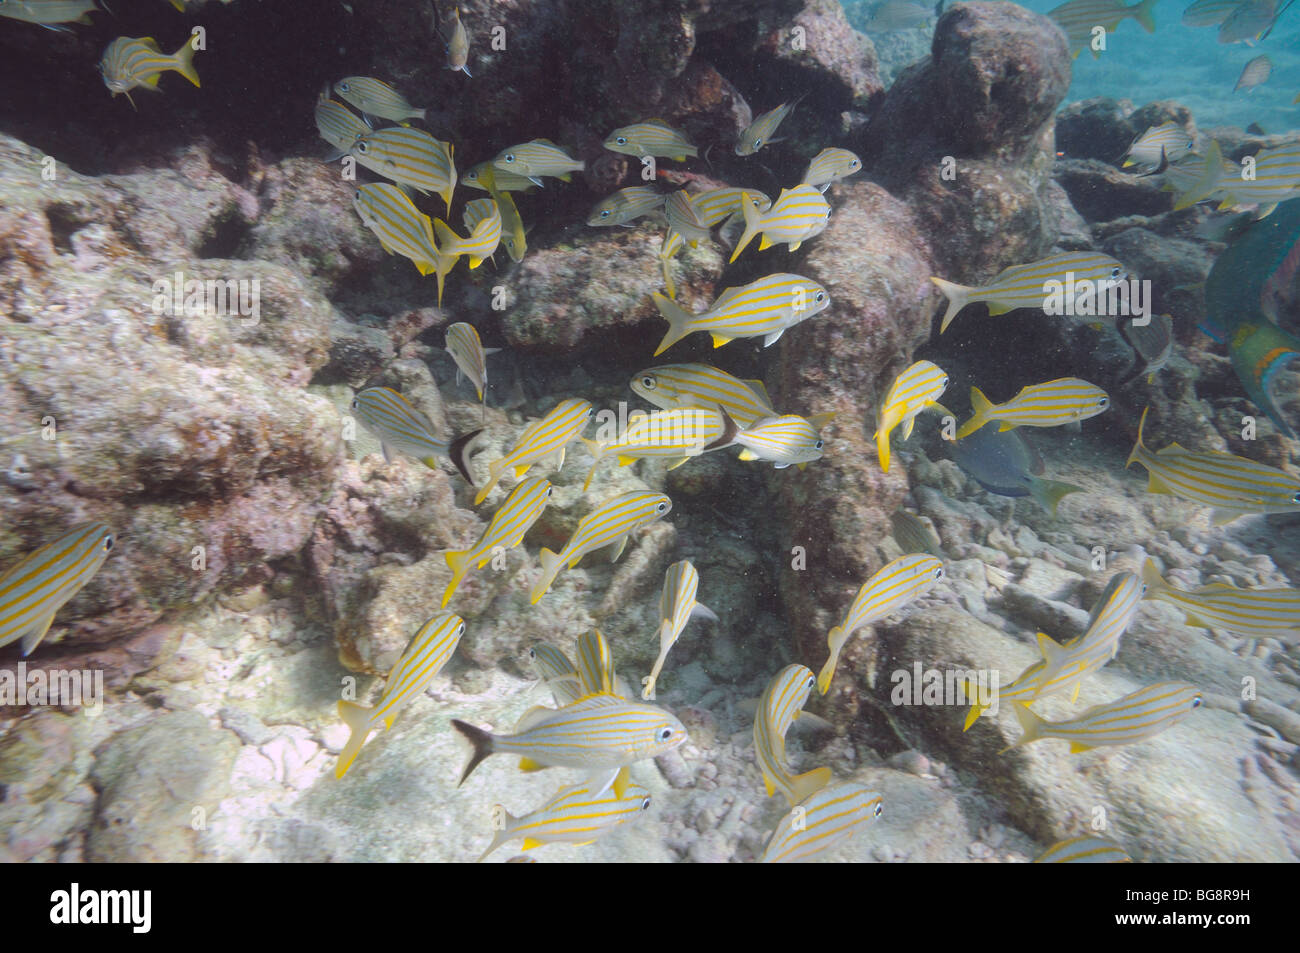 Underwater picture of tropical fishes. Key West, Florida Stock Photo